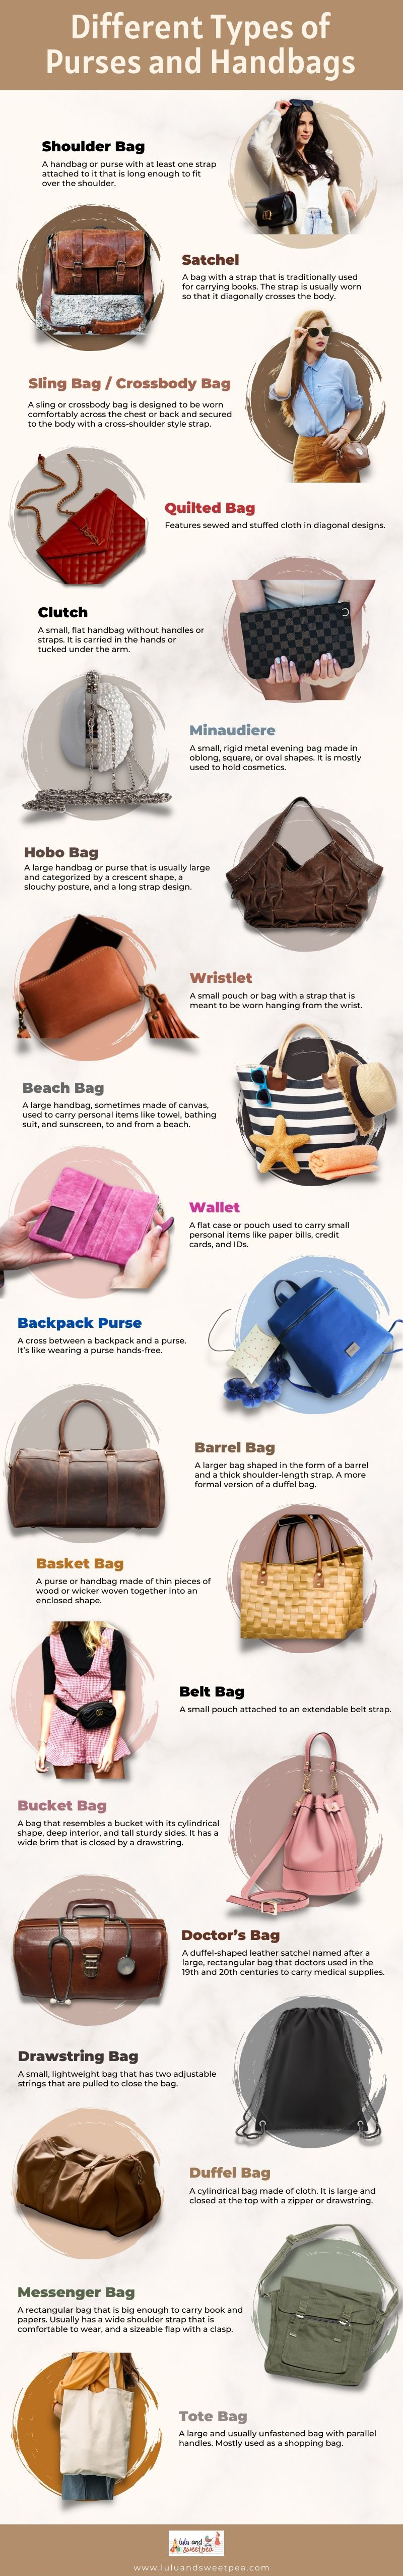 Different Types of Purses and Handbags